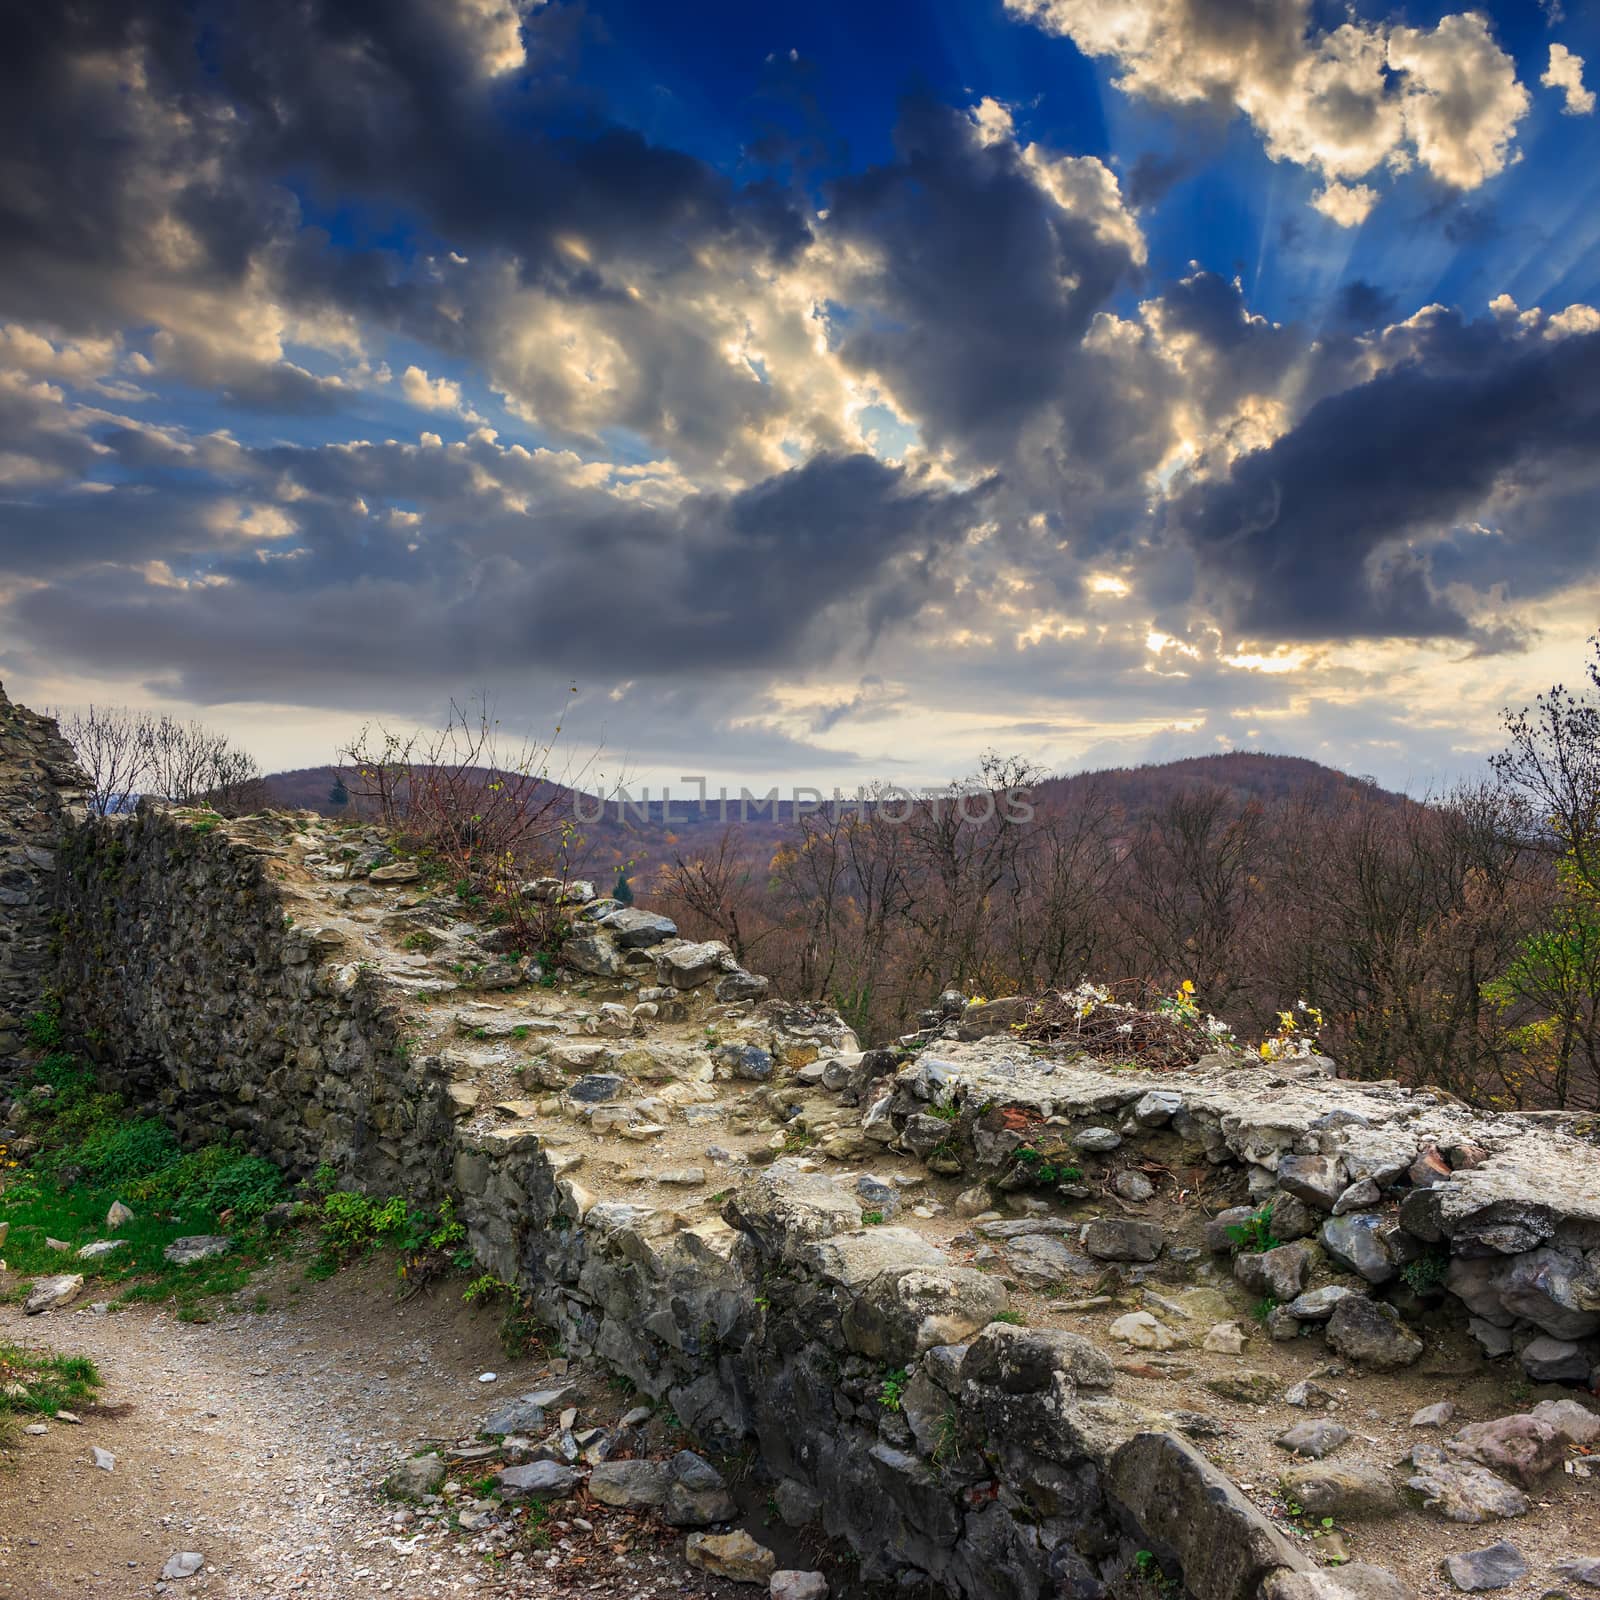 ruins of an old castle in the mountains by Pellinni